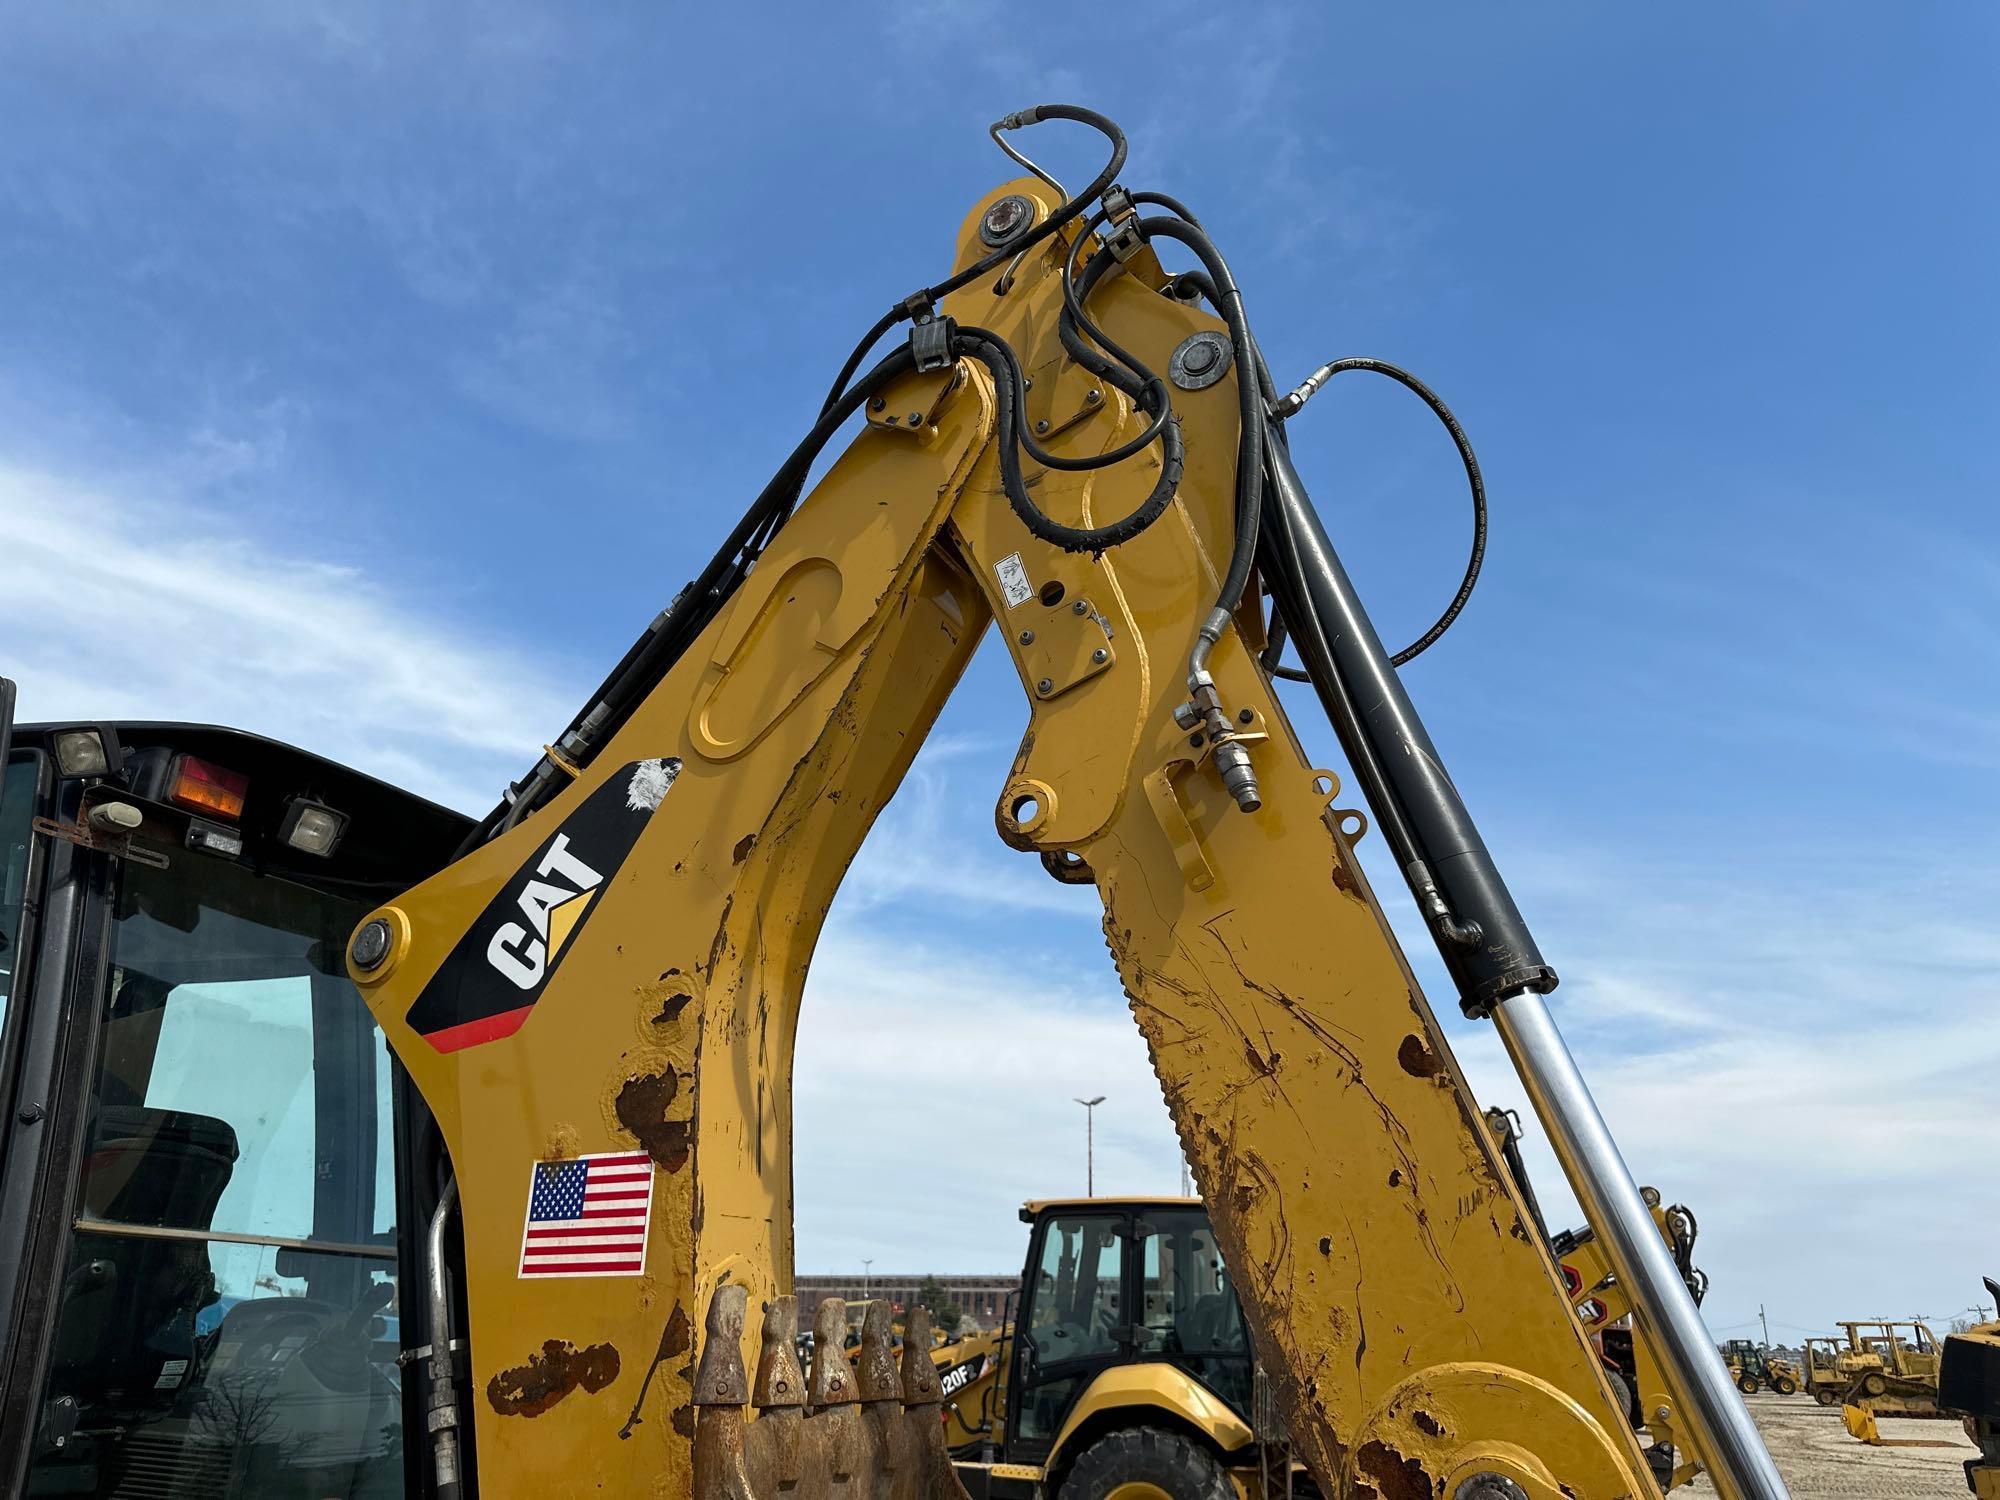 2014 CAT 430FIT TRACTOR LOADER BACKHOE SN:TRG500436 4x4, powered by Cat diesel engine, equipped with